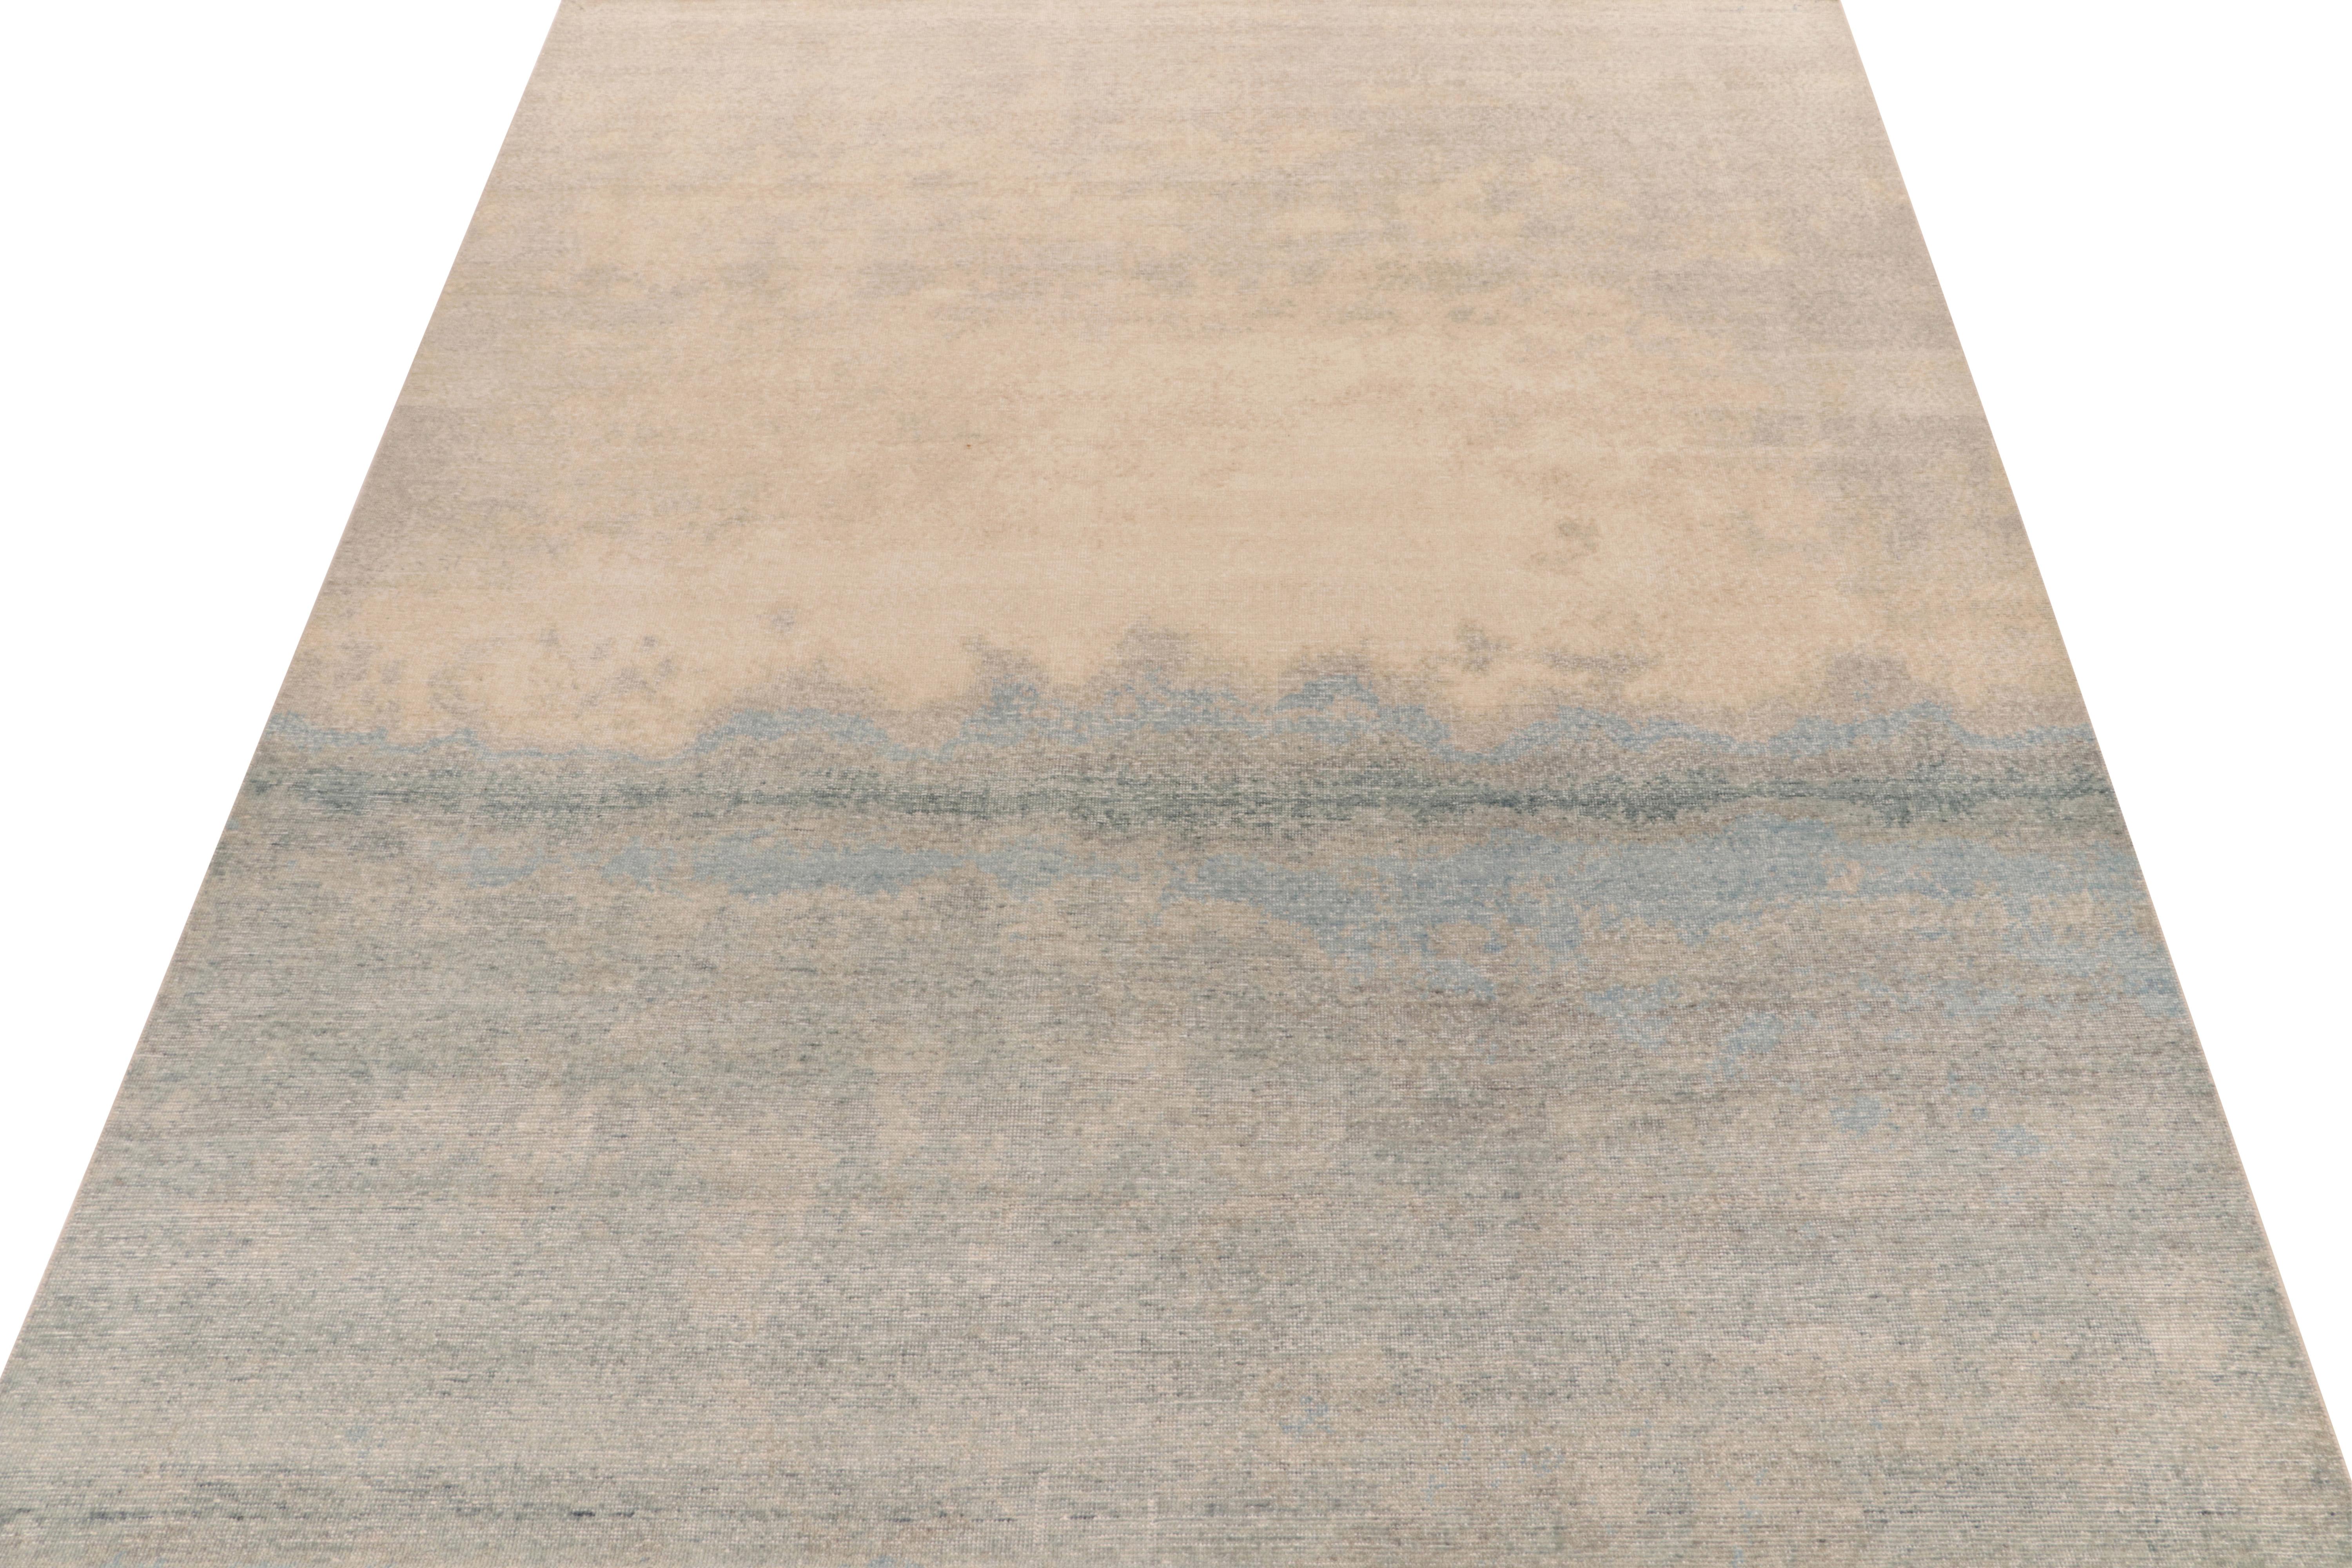 From Rug & Kilim’s Homage collection, a distressed style abstract rug design available for custom pieces in all sizes and colors. Exemplified in this 9x12 scale, enjoying the positive negative play of gray, blue & beige to perfectly match the shabby